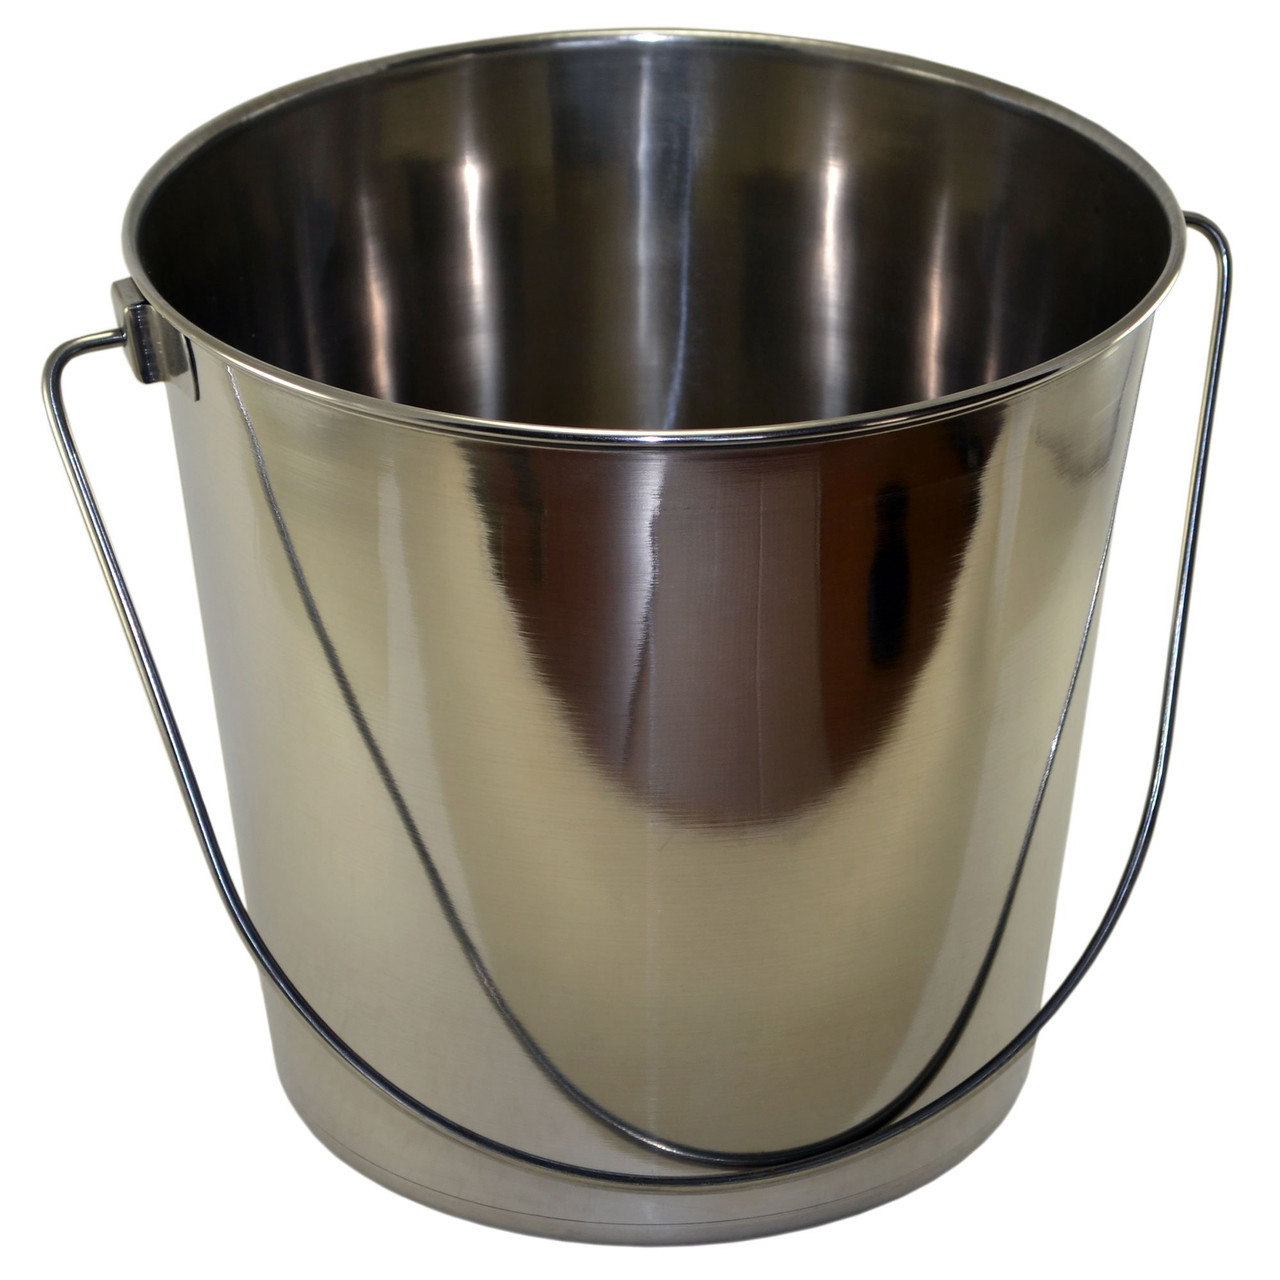 1 Quart Stainless Steel Utility Pail, Stainless Steel Utility Pails